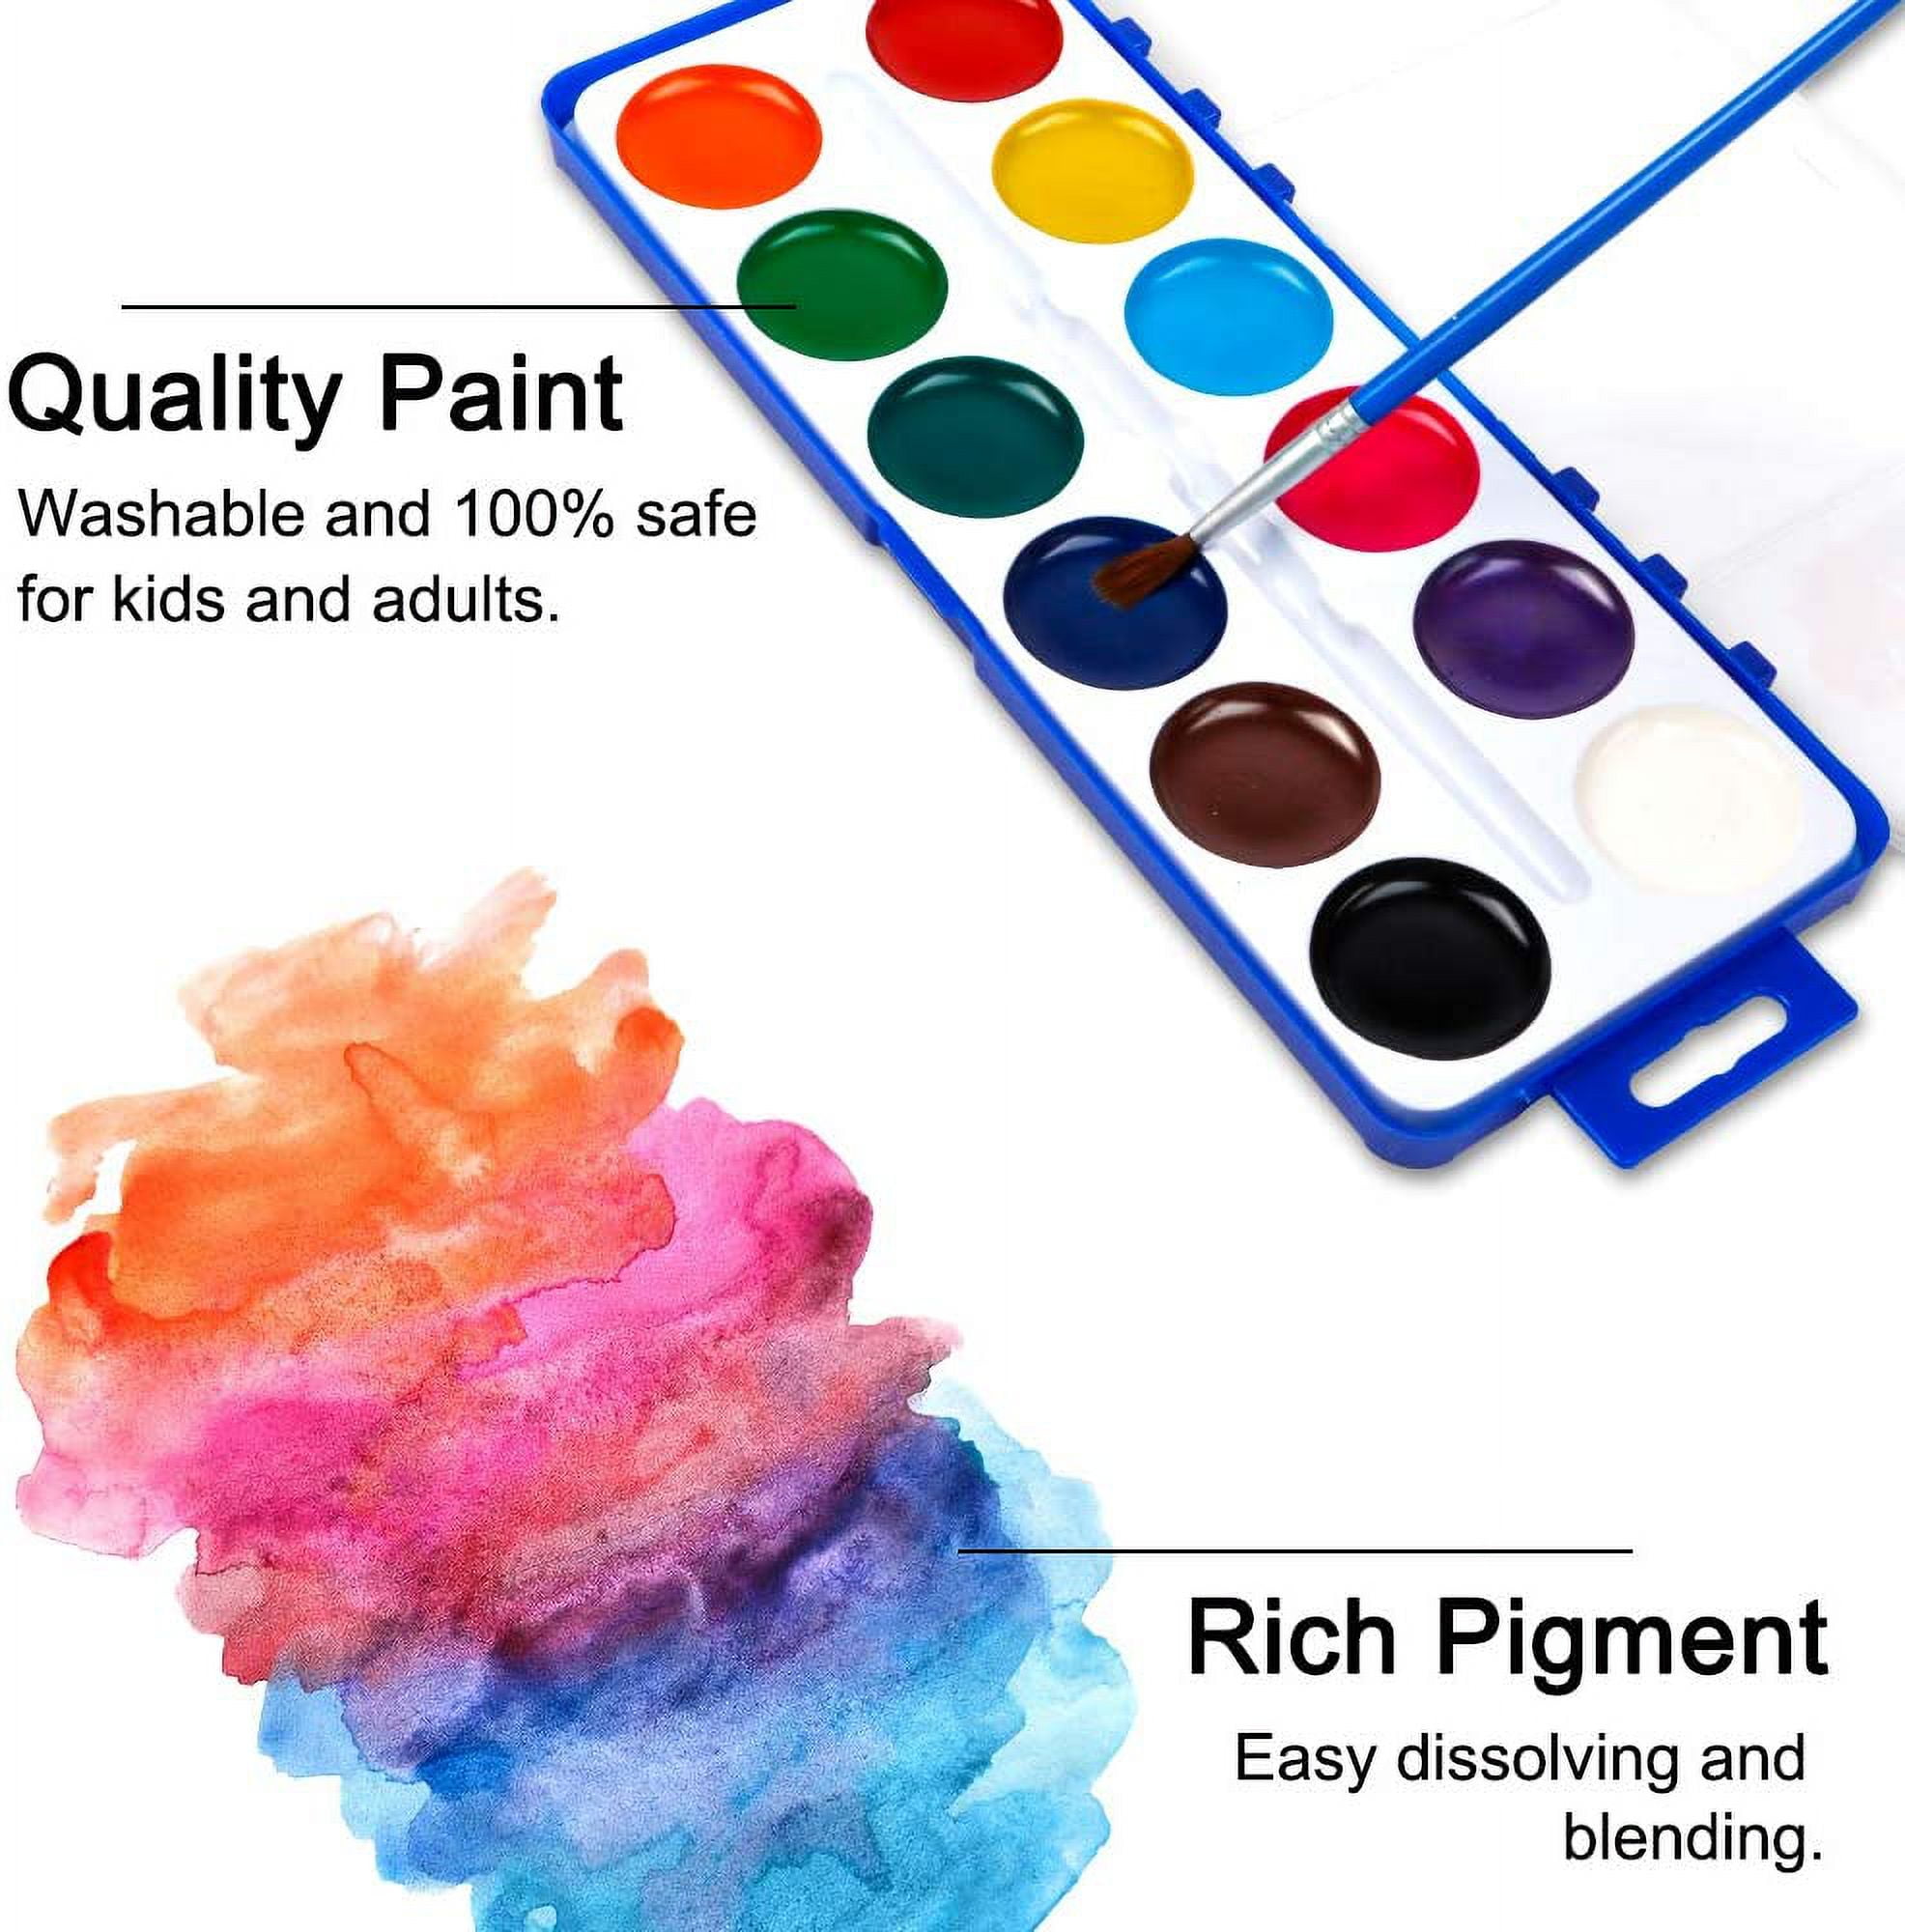 Watercolor Paint Sets for Kids - Bulk Pack of 12, 8 Washable Water Color  Paints in Palette Tray and Painting Brush for Coloring, Art, Party Favors